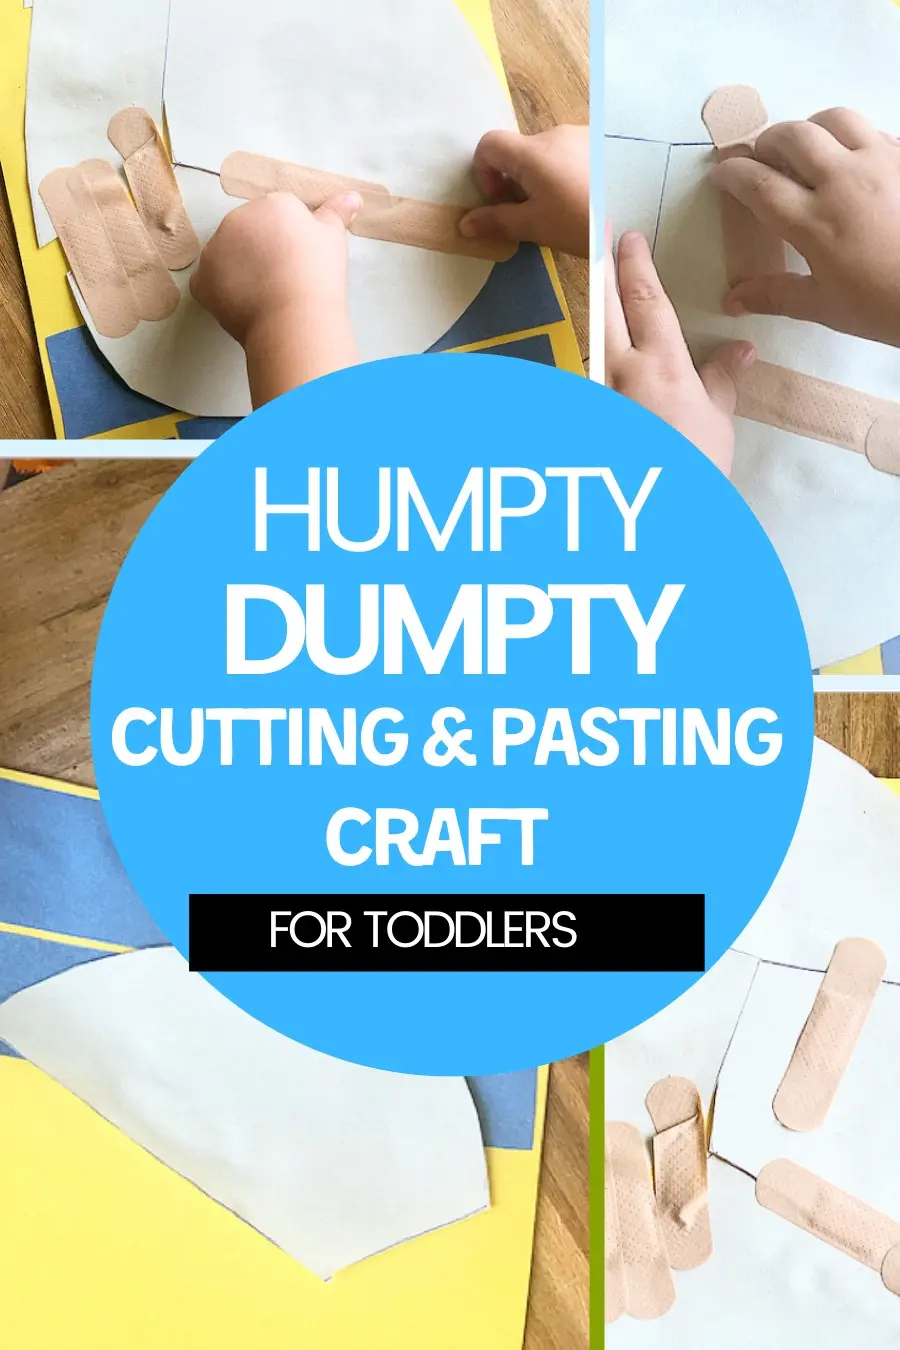 Humpty Dumpty cutting and pasting craft for toddlers 